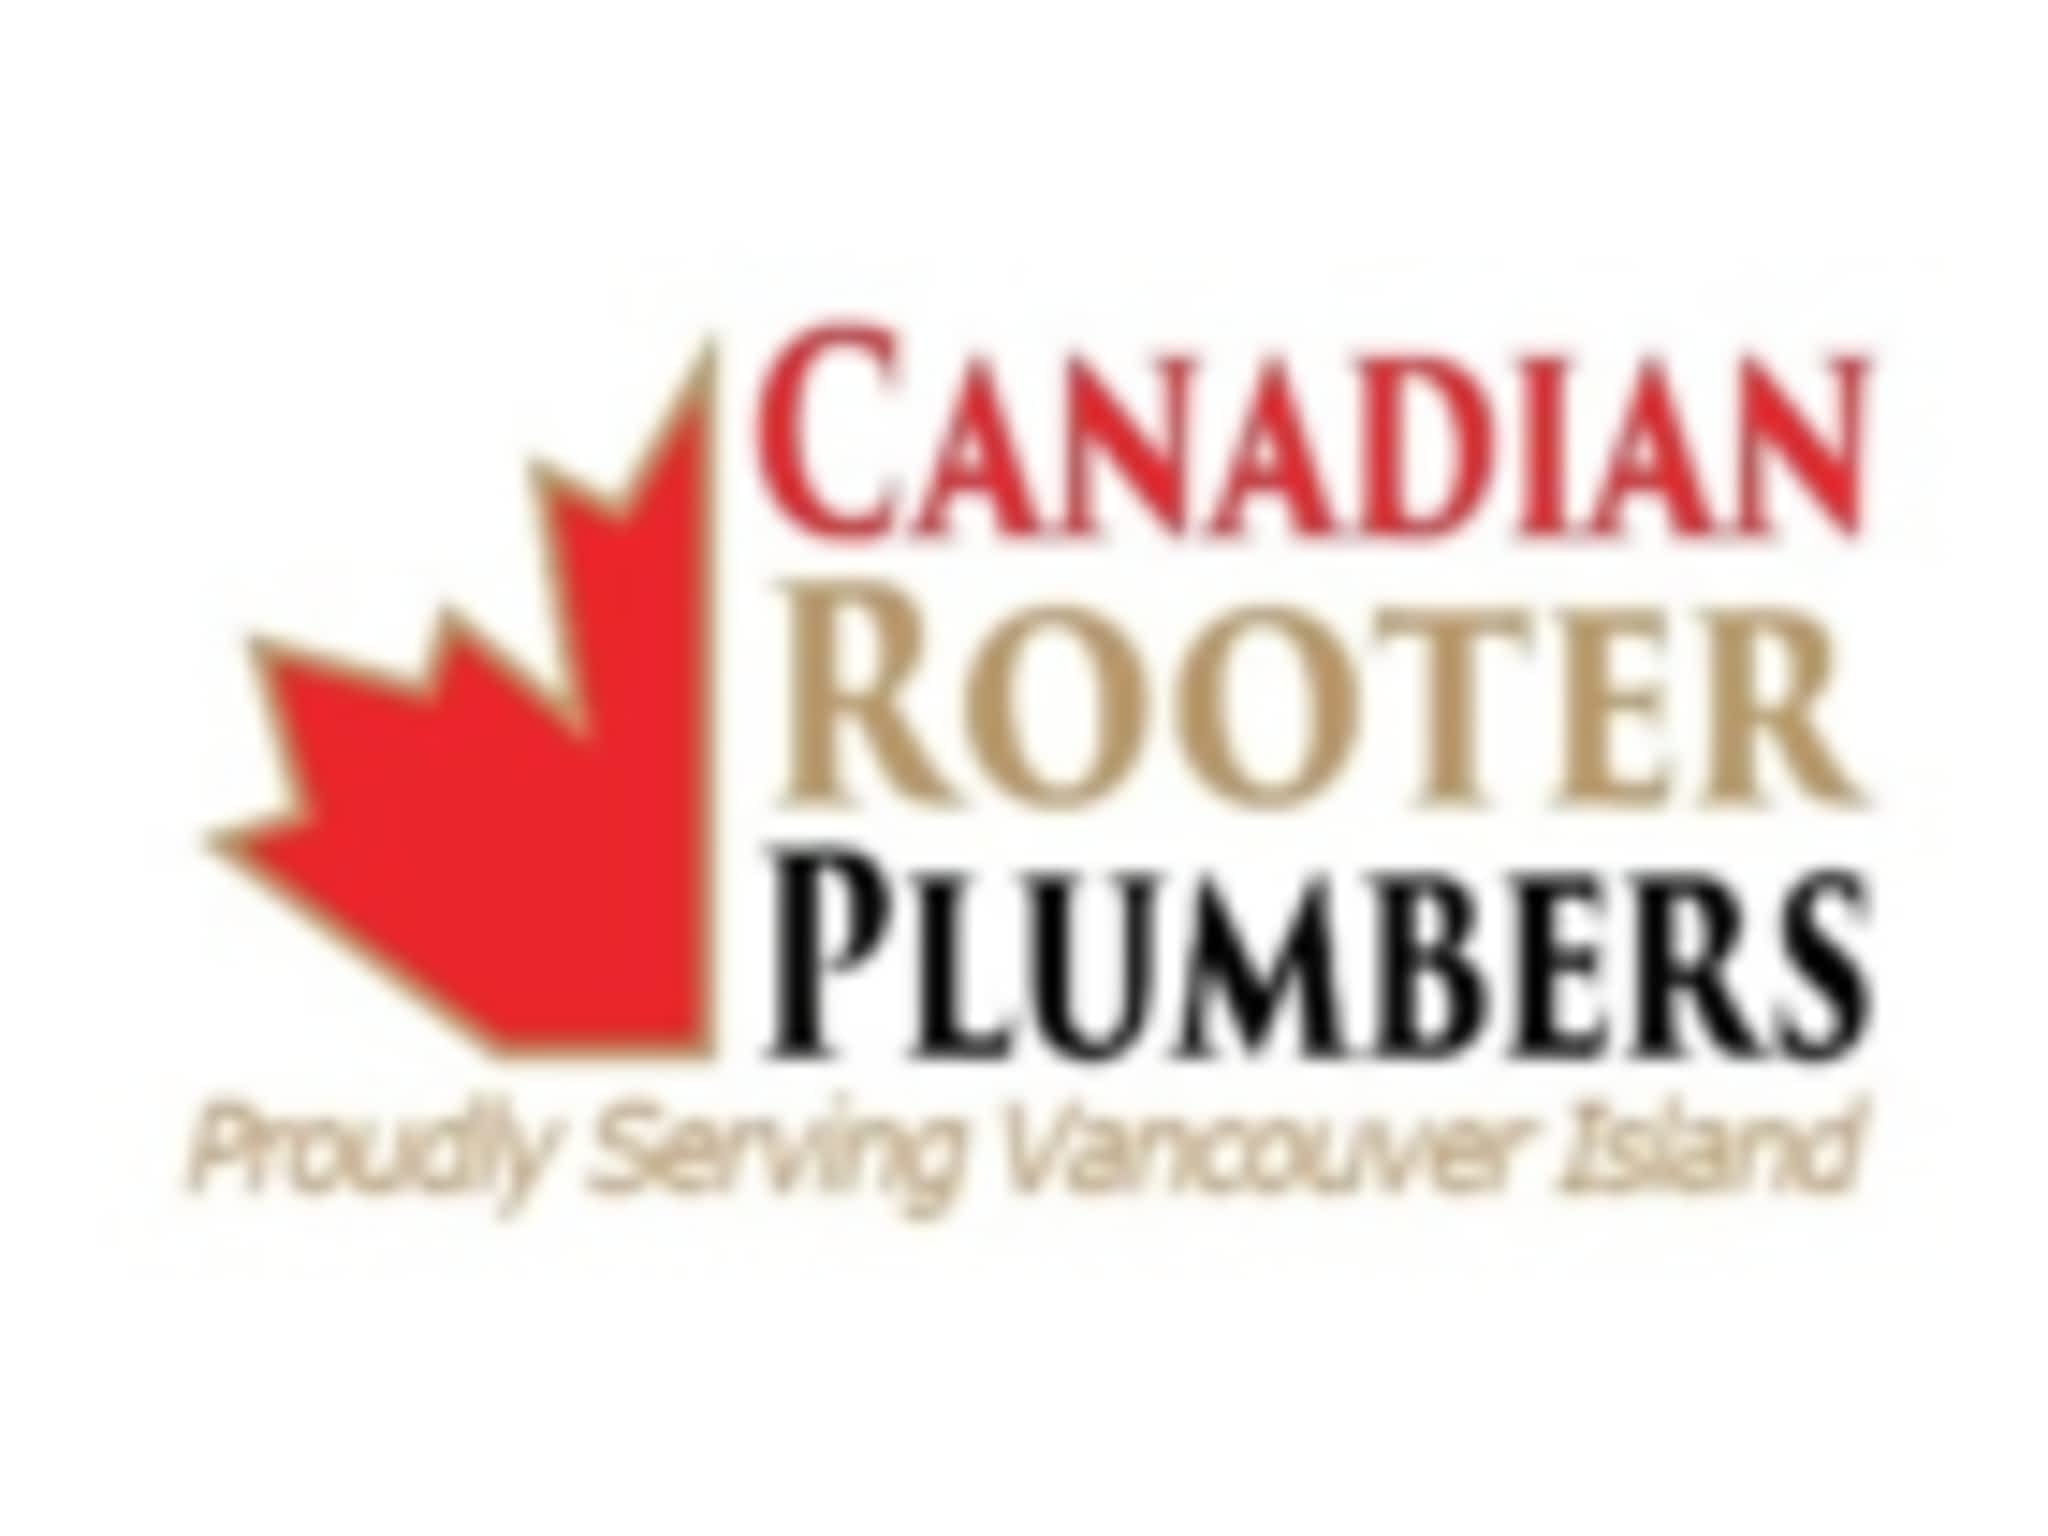 photo Canadian Rooter Plumbers